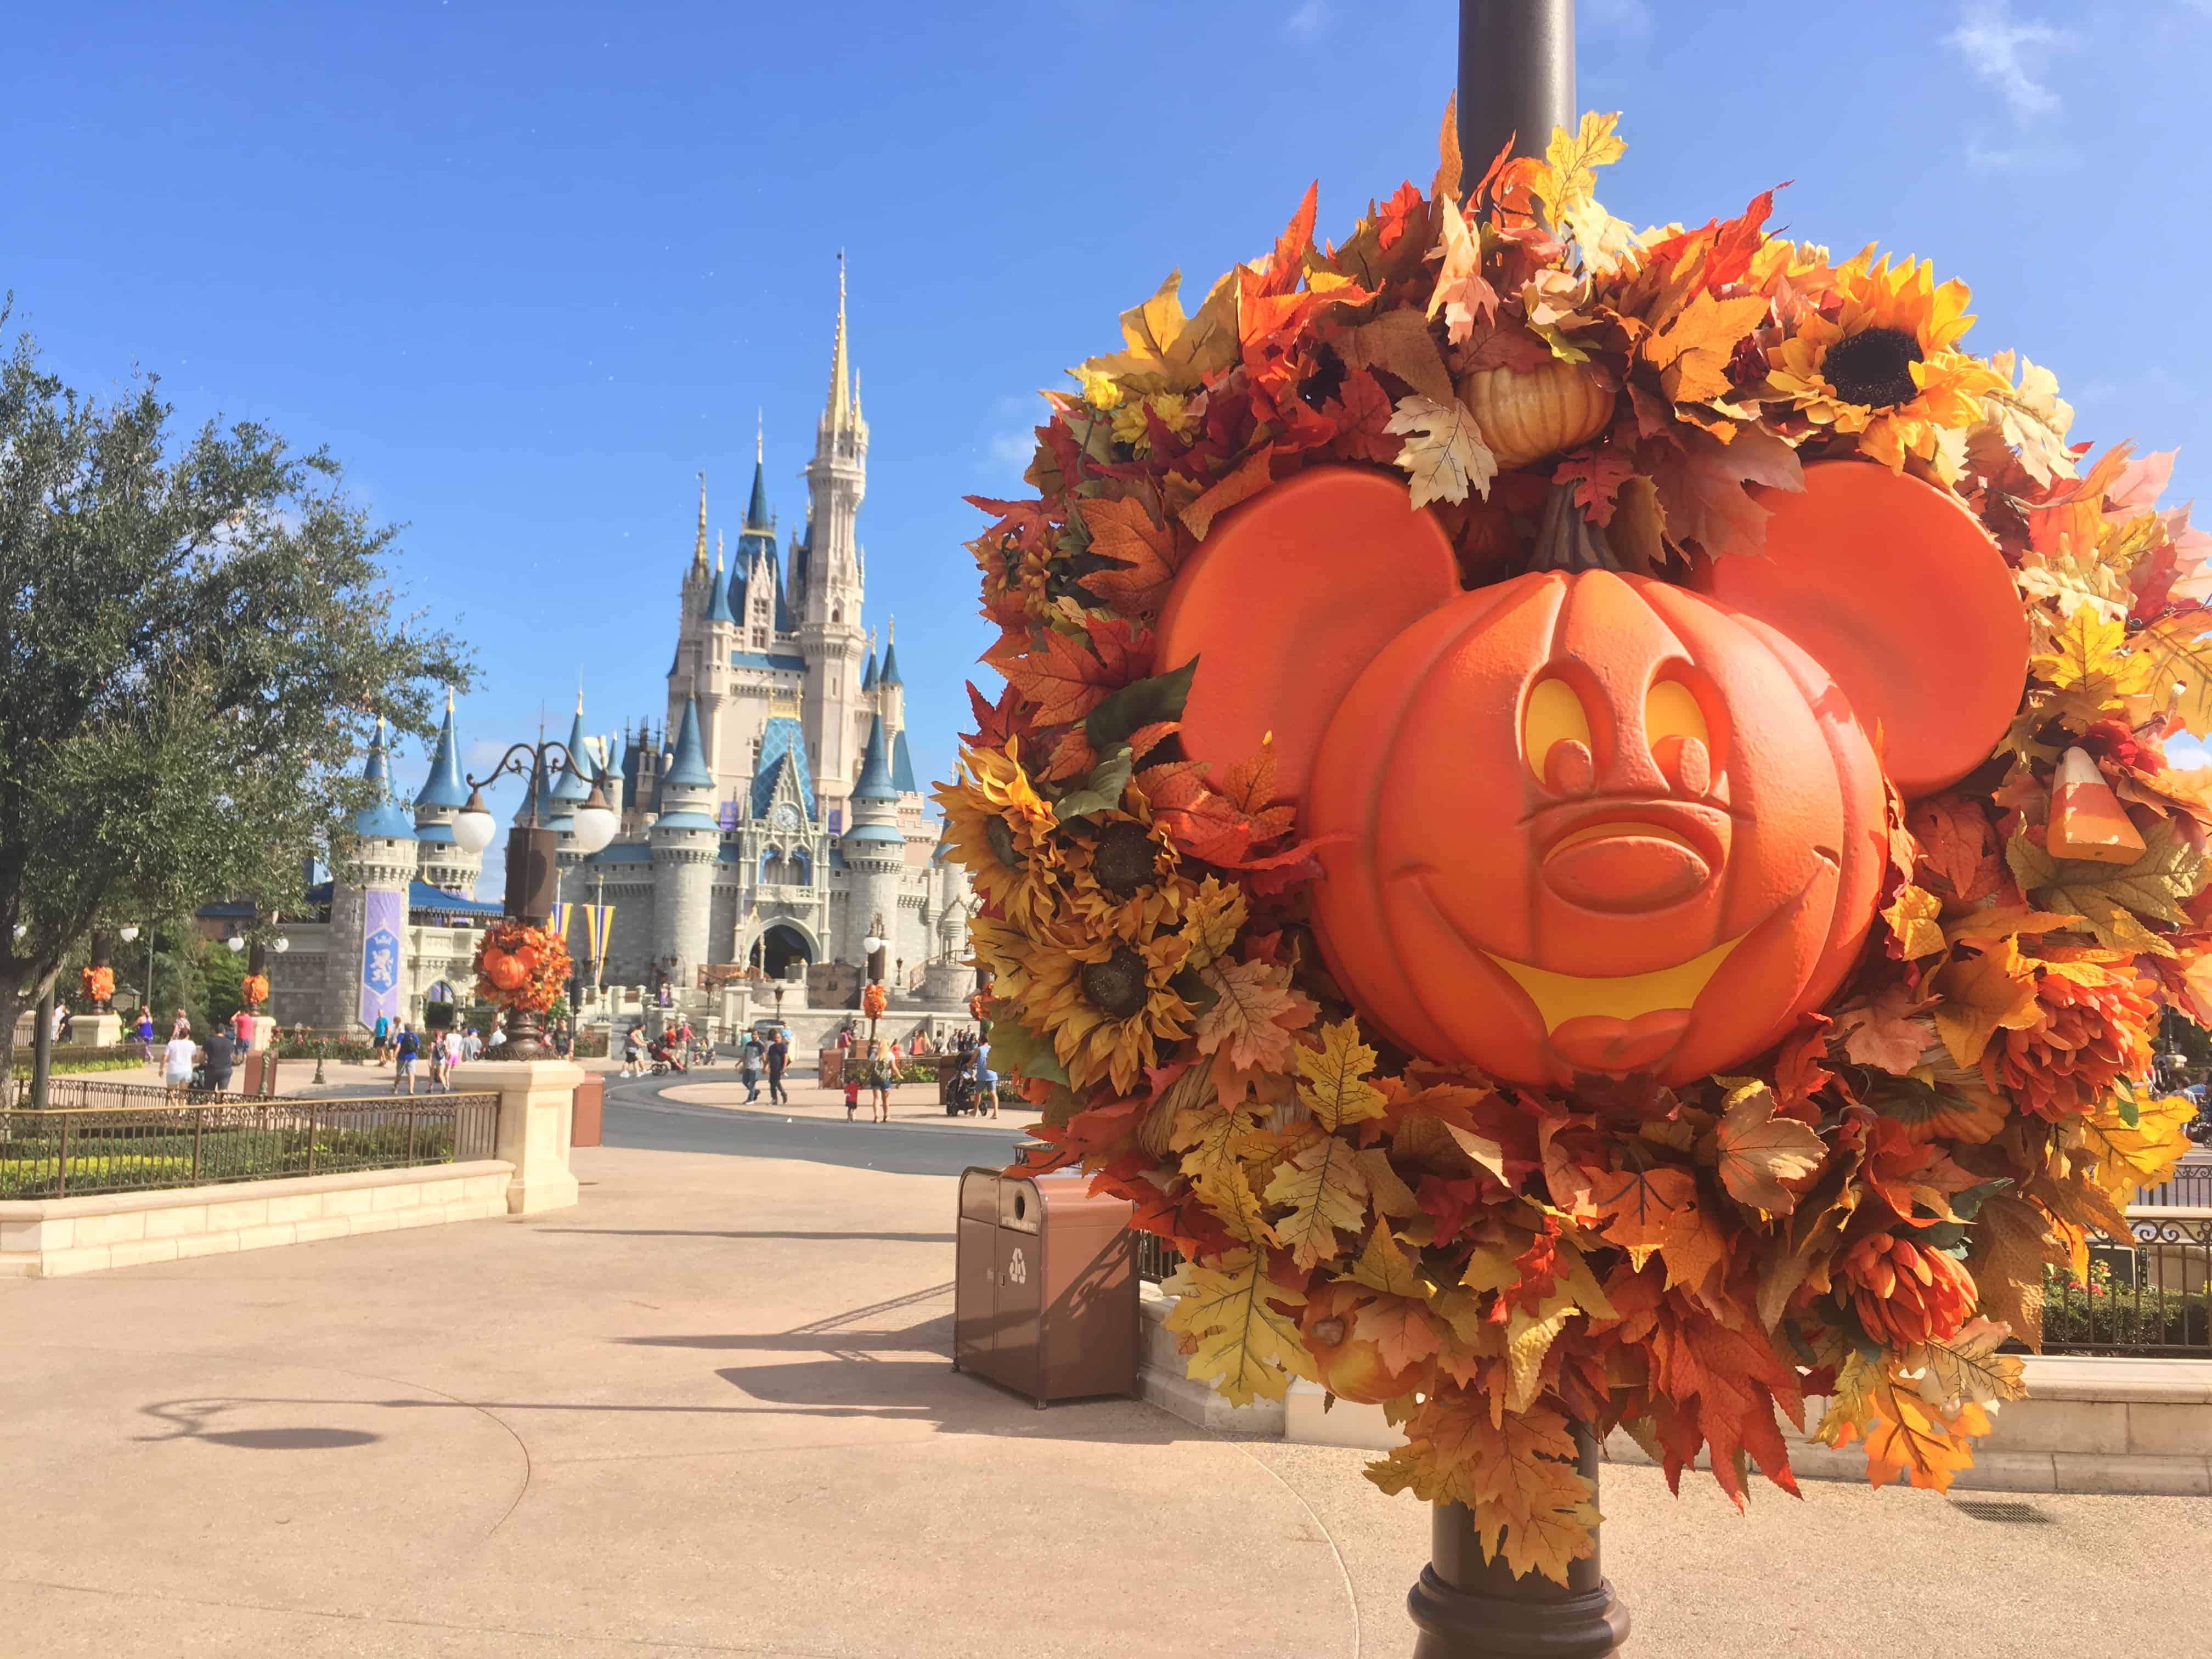 Mickey’s Not So Scary Halloween Party – What to do